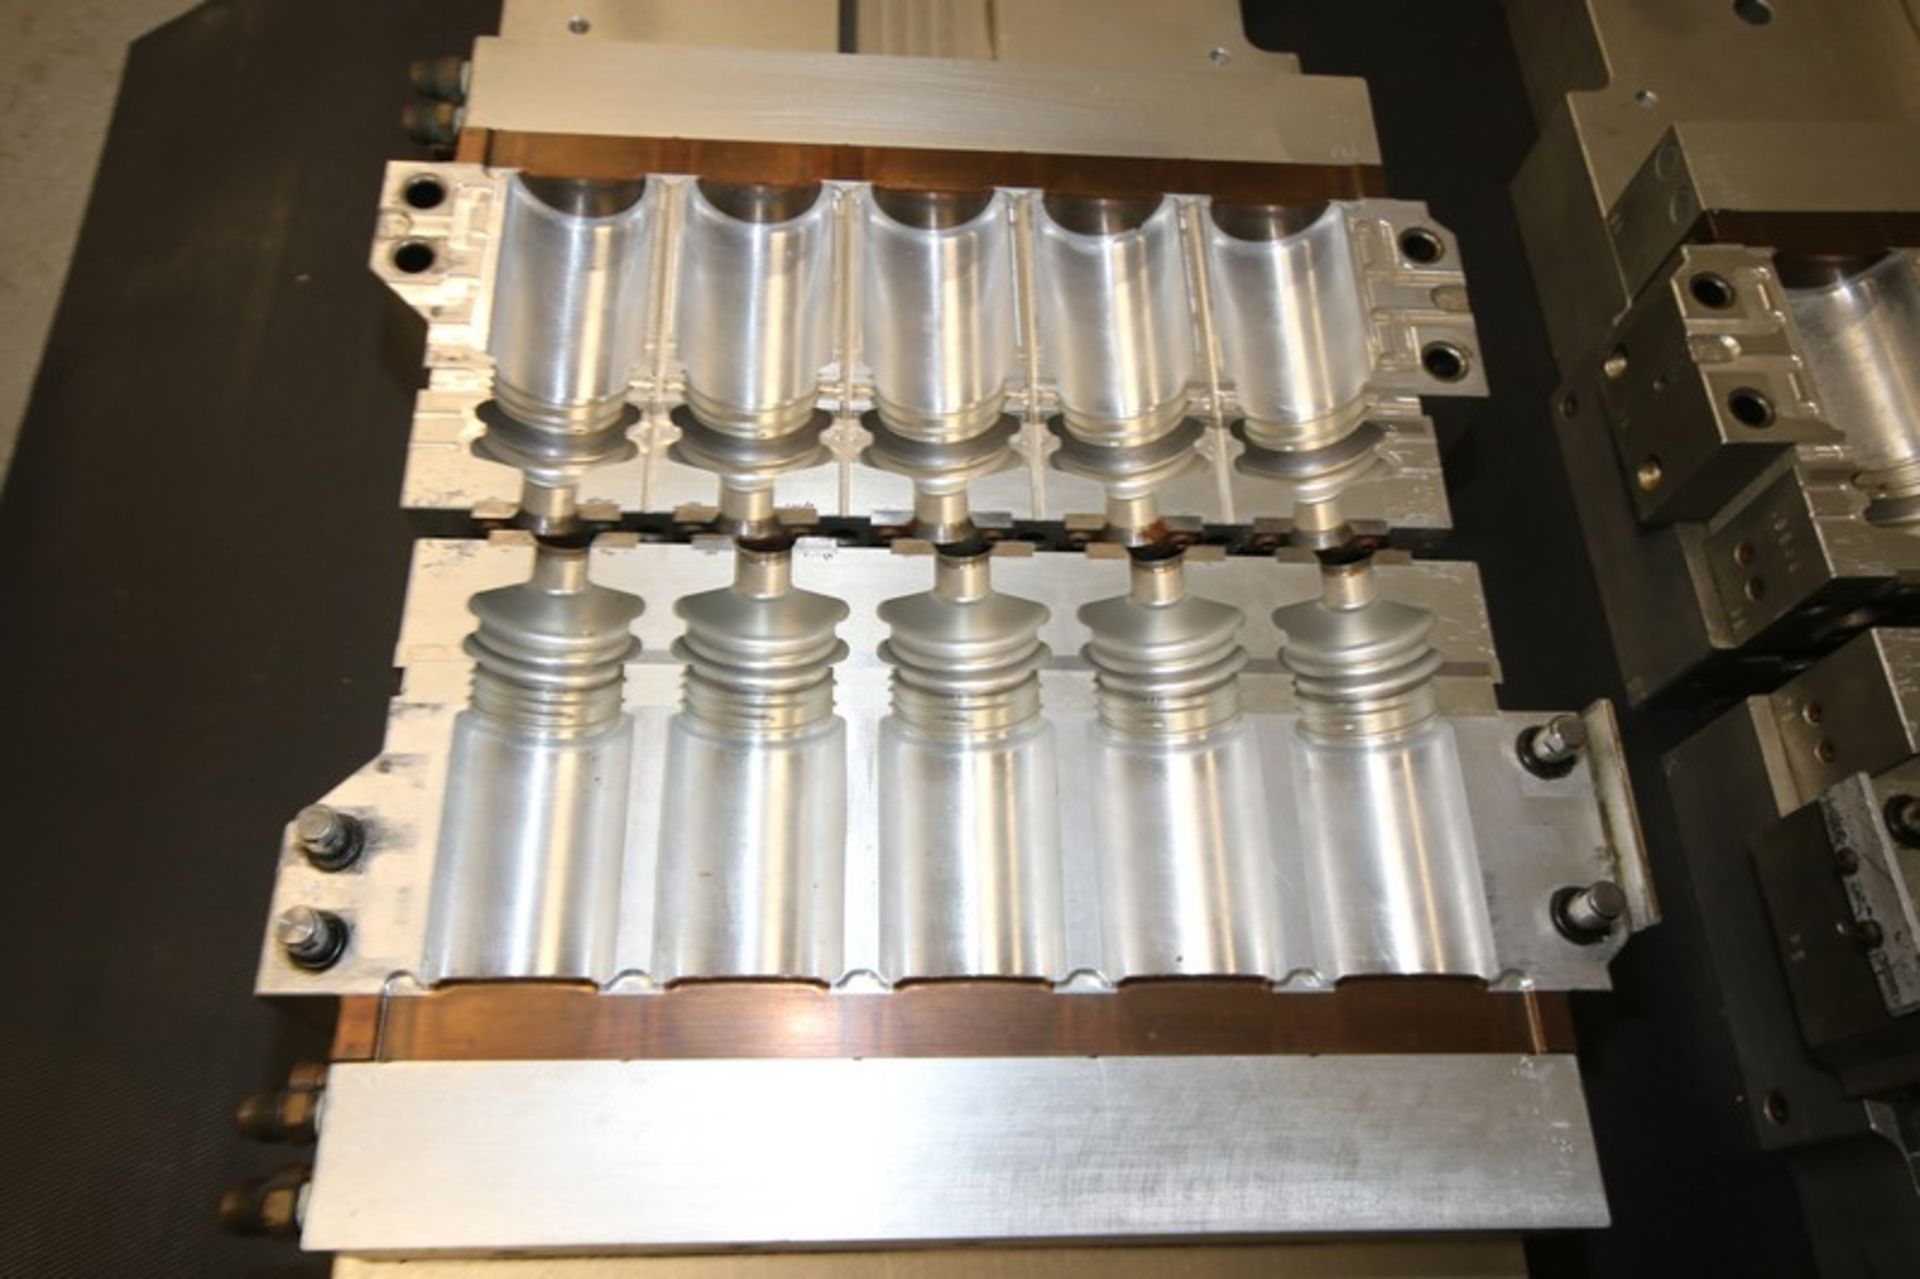 Compact 5-Wide S/S Bottle Molds, S/N 905.851.7724/859.371.3250, Overall Dims.: Aprox. 18-1/4" L x - Image 5 of 9